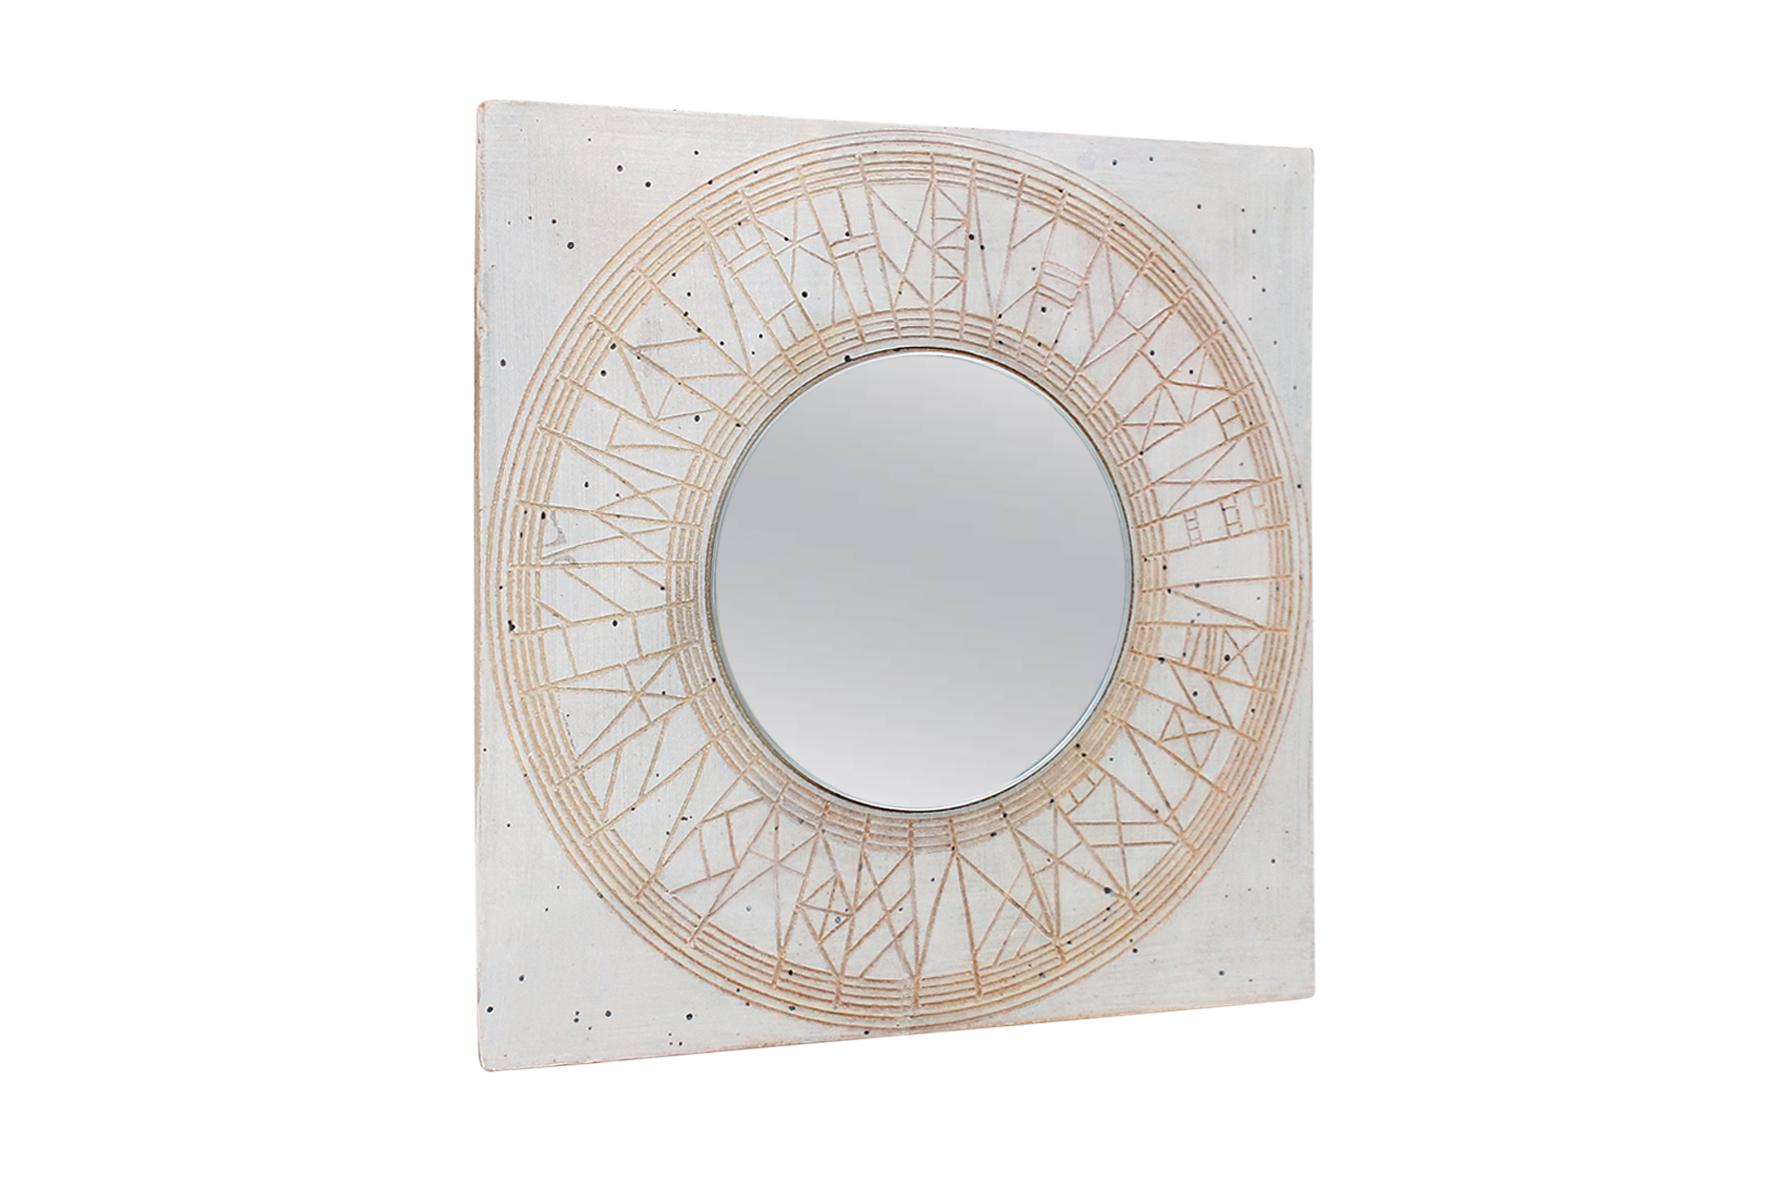 Square Studio Pottery mirror by Massachusetts potter William Wyman. This mirror is uniquely carved in a geometric design. Signed and dated with the Wyman script to reverse.

____

We're offering our customers free domestic shipping on all items